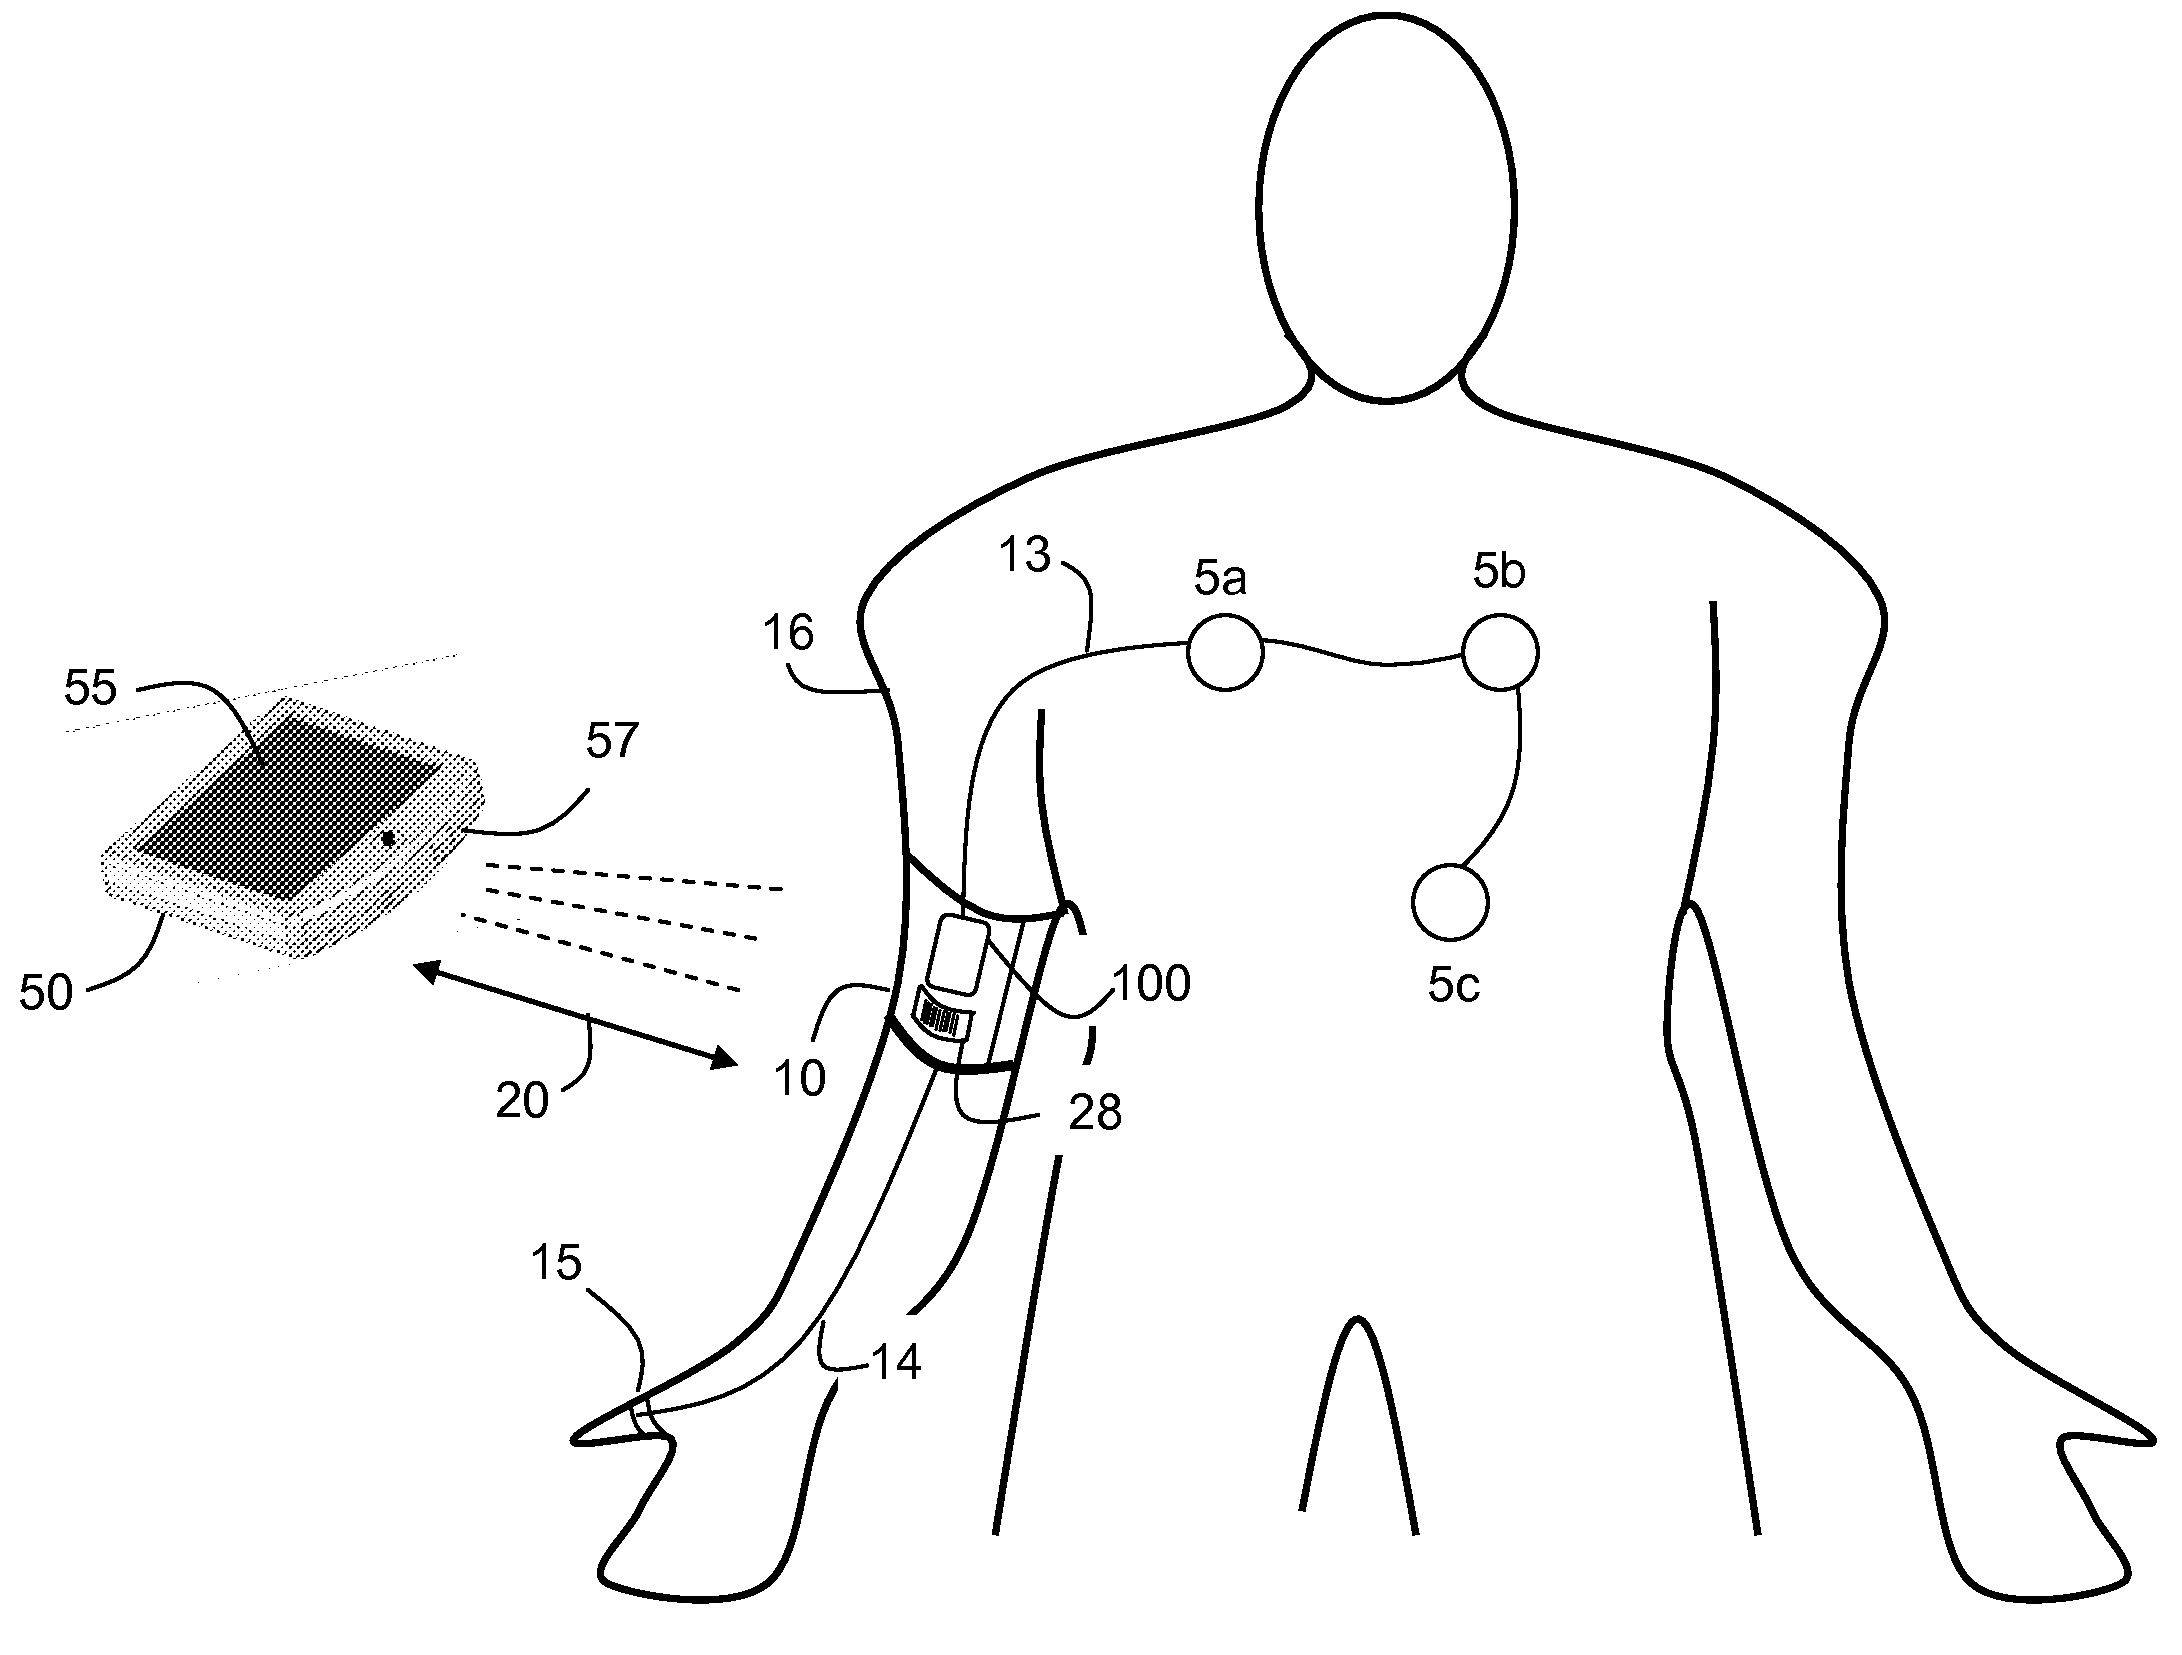 System for measuring blood pressure featuring a blood pressure cuff comprising size information